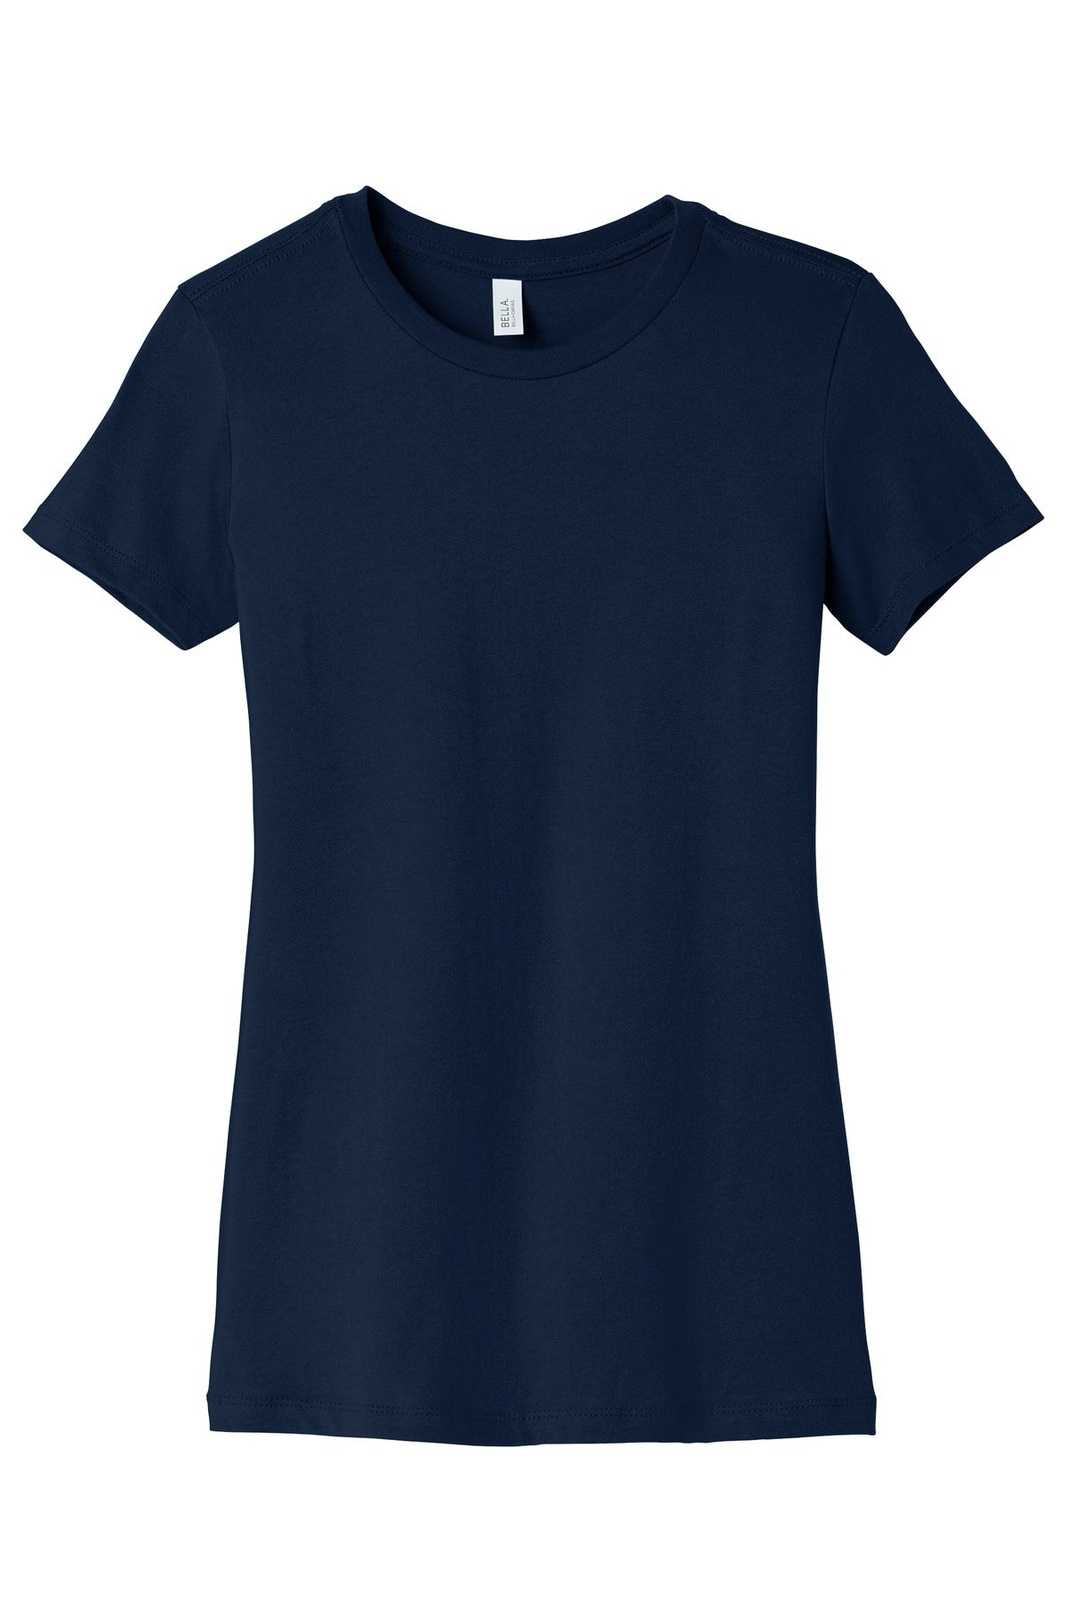 Bella + Canvas 6004 Women's The Favorite Tee - Navy - HIT a Double